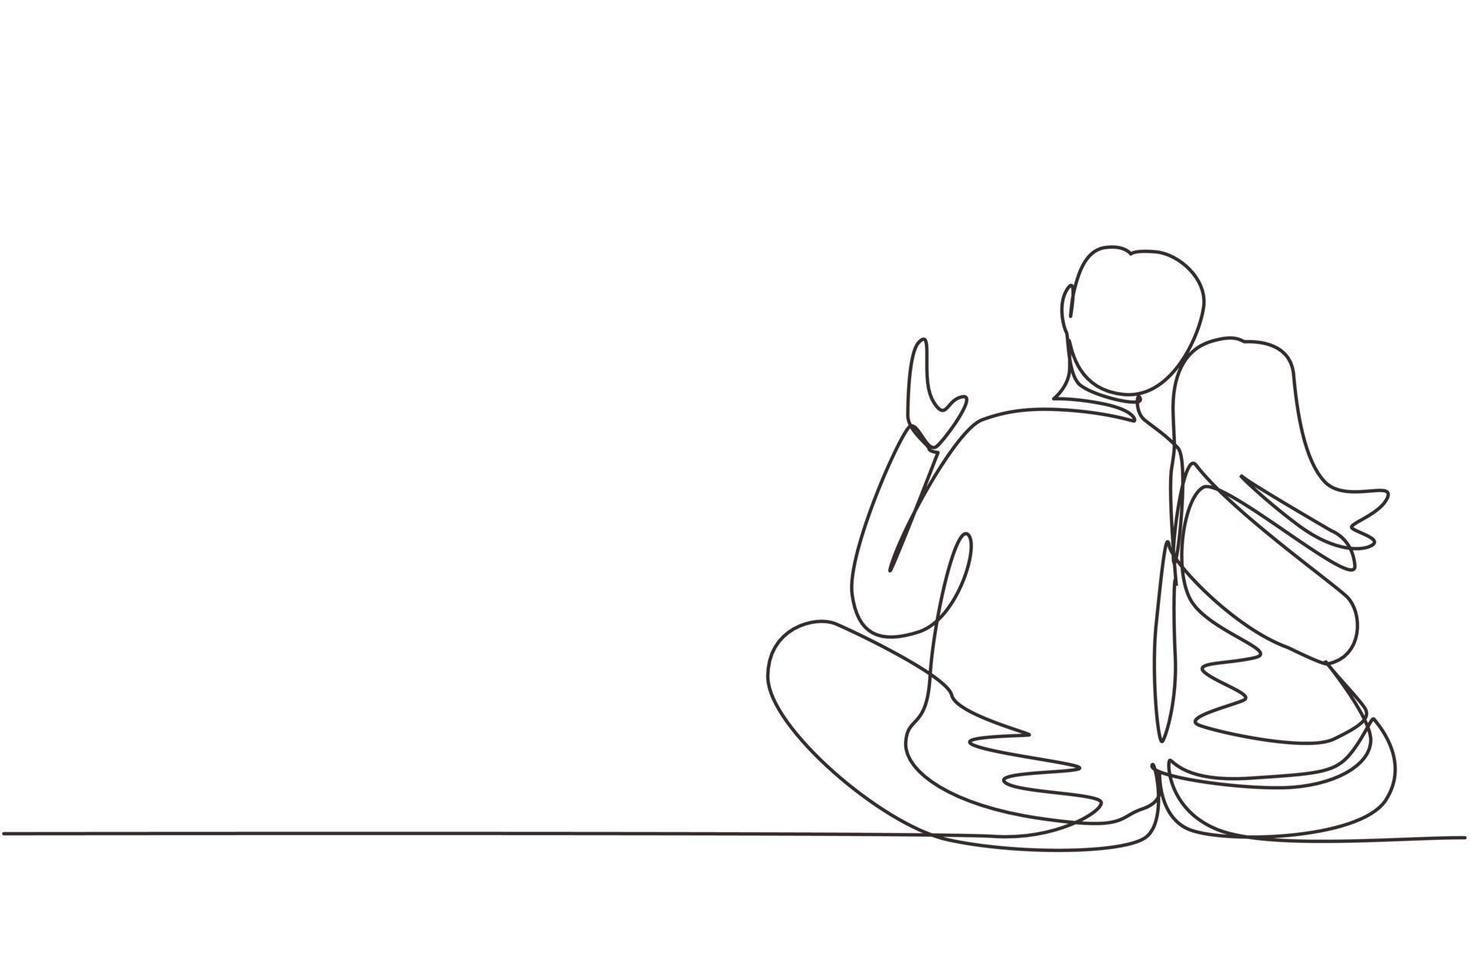 Continuous one line drawing people in love sit hugging and looking at moon and stars. Man and woman enjoying romantic picturesque landscape together. Single line design vector graphic illustration